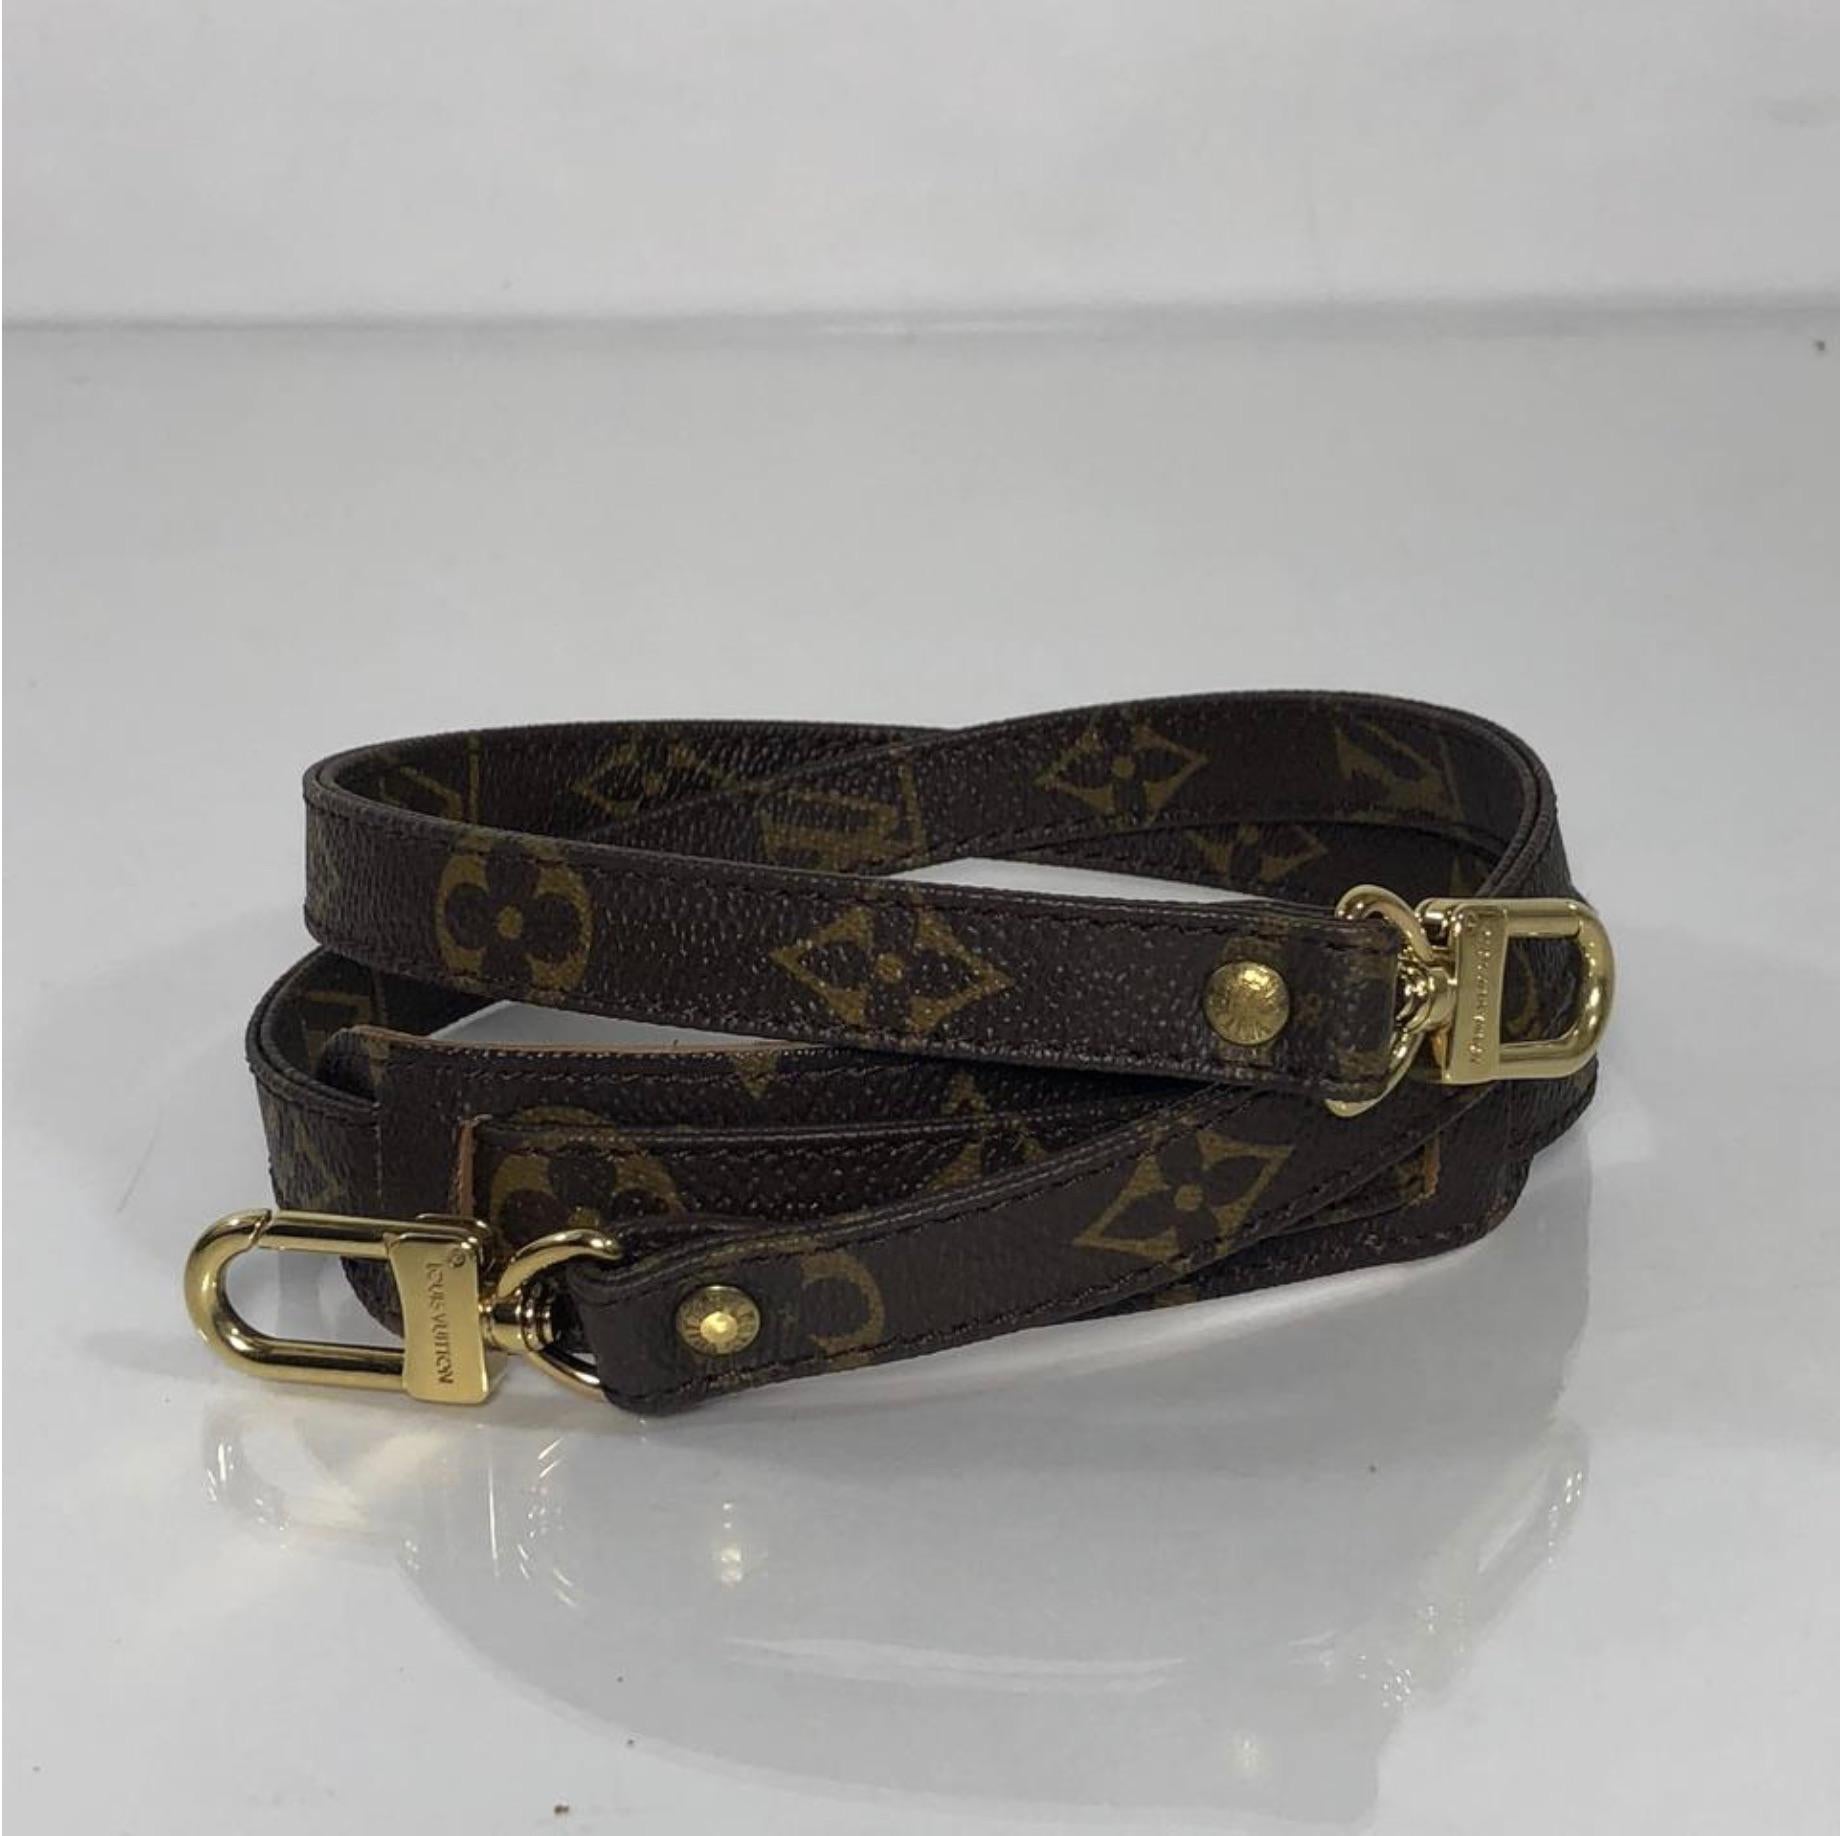 MODEL - Louis Vuitton Monogram Shoulder Strap 

CONDITION - Looks New! No signs of wear.

SKU - 2519

DATE/SERIAL CODE - NA

ORIGIN - France

PRODUCTION - NA

DIMENSIONS - L38.6 x H.6 x D.2

STRAP/HANDLE DROP - NA

MATERIAL - Monogram Canvas

COMES